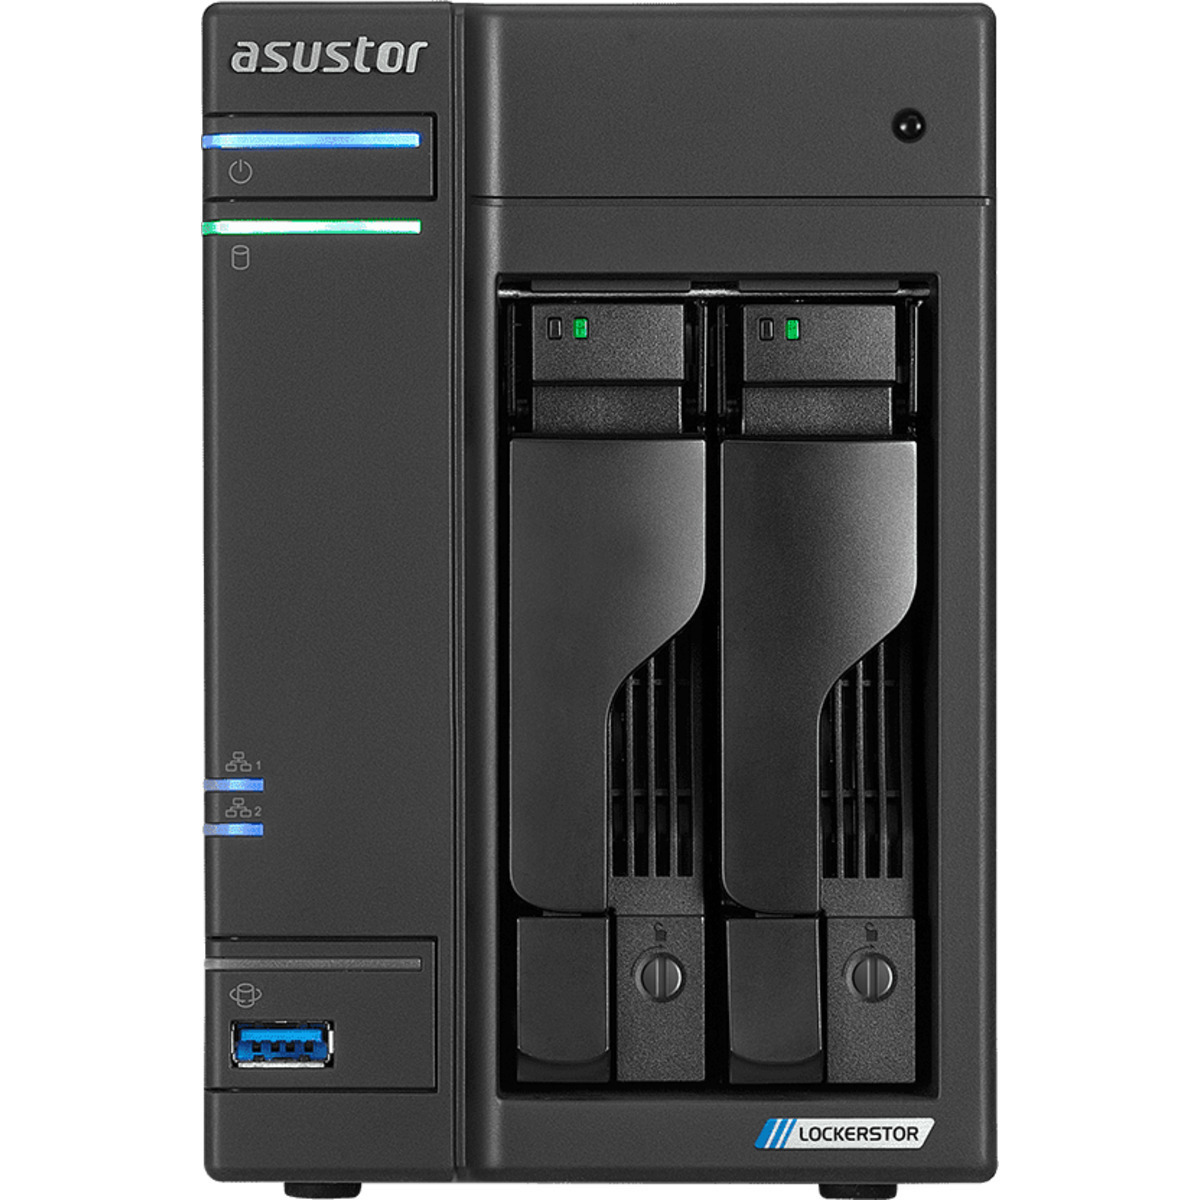 ASUSTOR AS6602T Lockerstor 2 1tb 2-Bay Desktop Multimedia / Power User / Business NAS - Network Attached Storage Device 1x1tb Sandisk Ultra 3D SDSSDH3-1T00 2.5 560/520MB/s SATA 6Gb/s SSD CONSUMER Class Drives Installed - Burn-In Tested - FREE RAM UPGRADE AS6602T Lockerstor 2